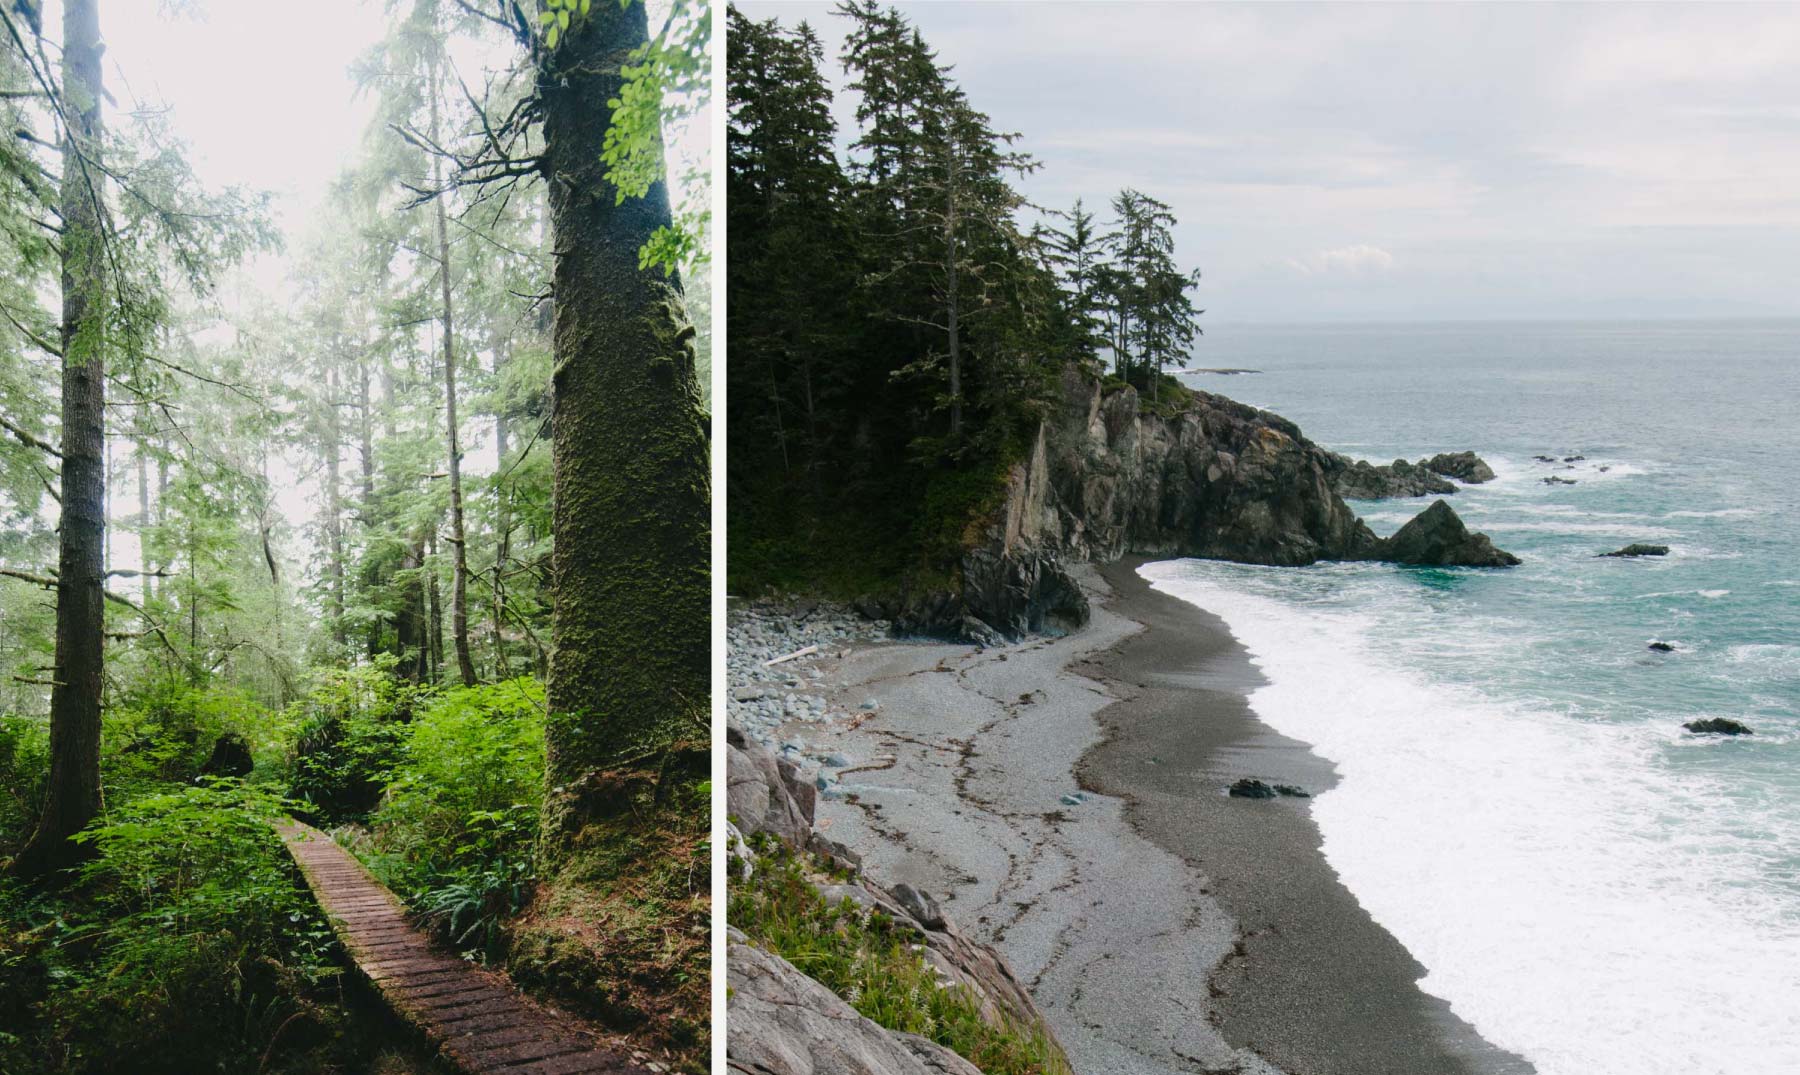 Hiking through forests and rugged rocky seascapes on the West Coast Trail